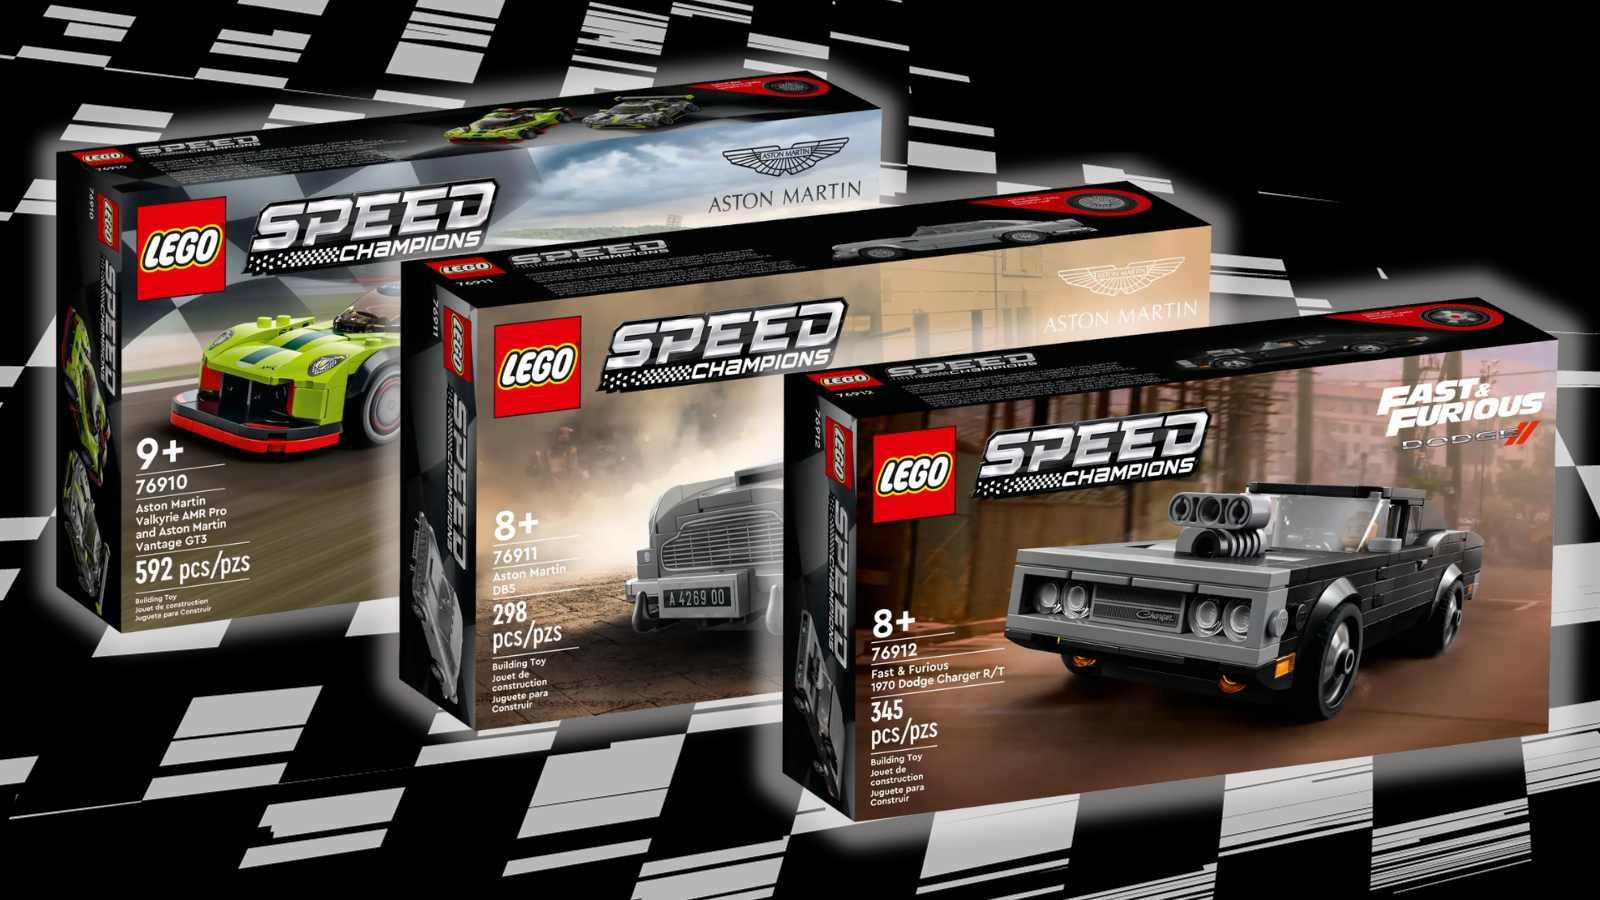 Retiring LEGO Speed Champions sets on a black background with a racing flag.